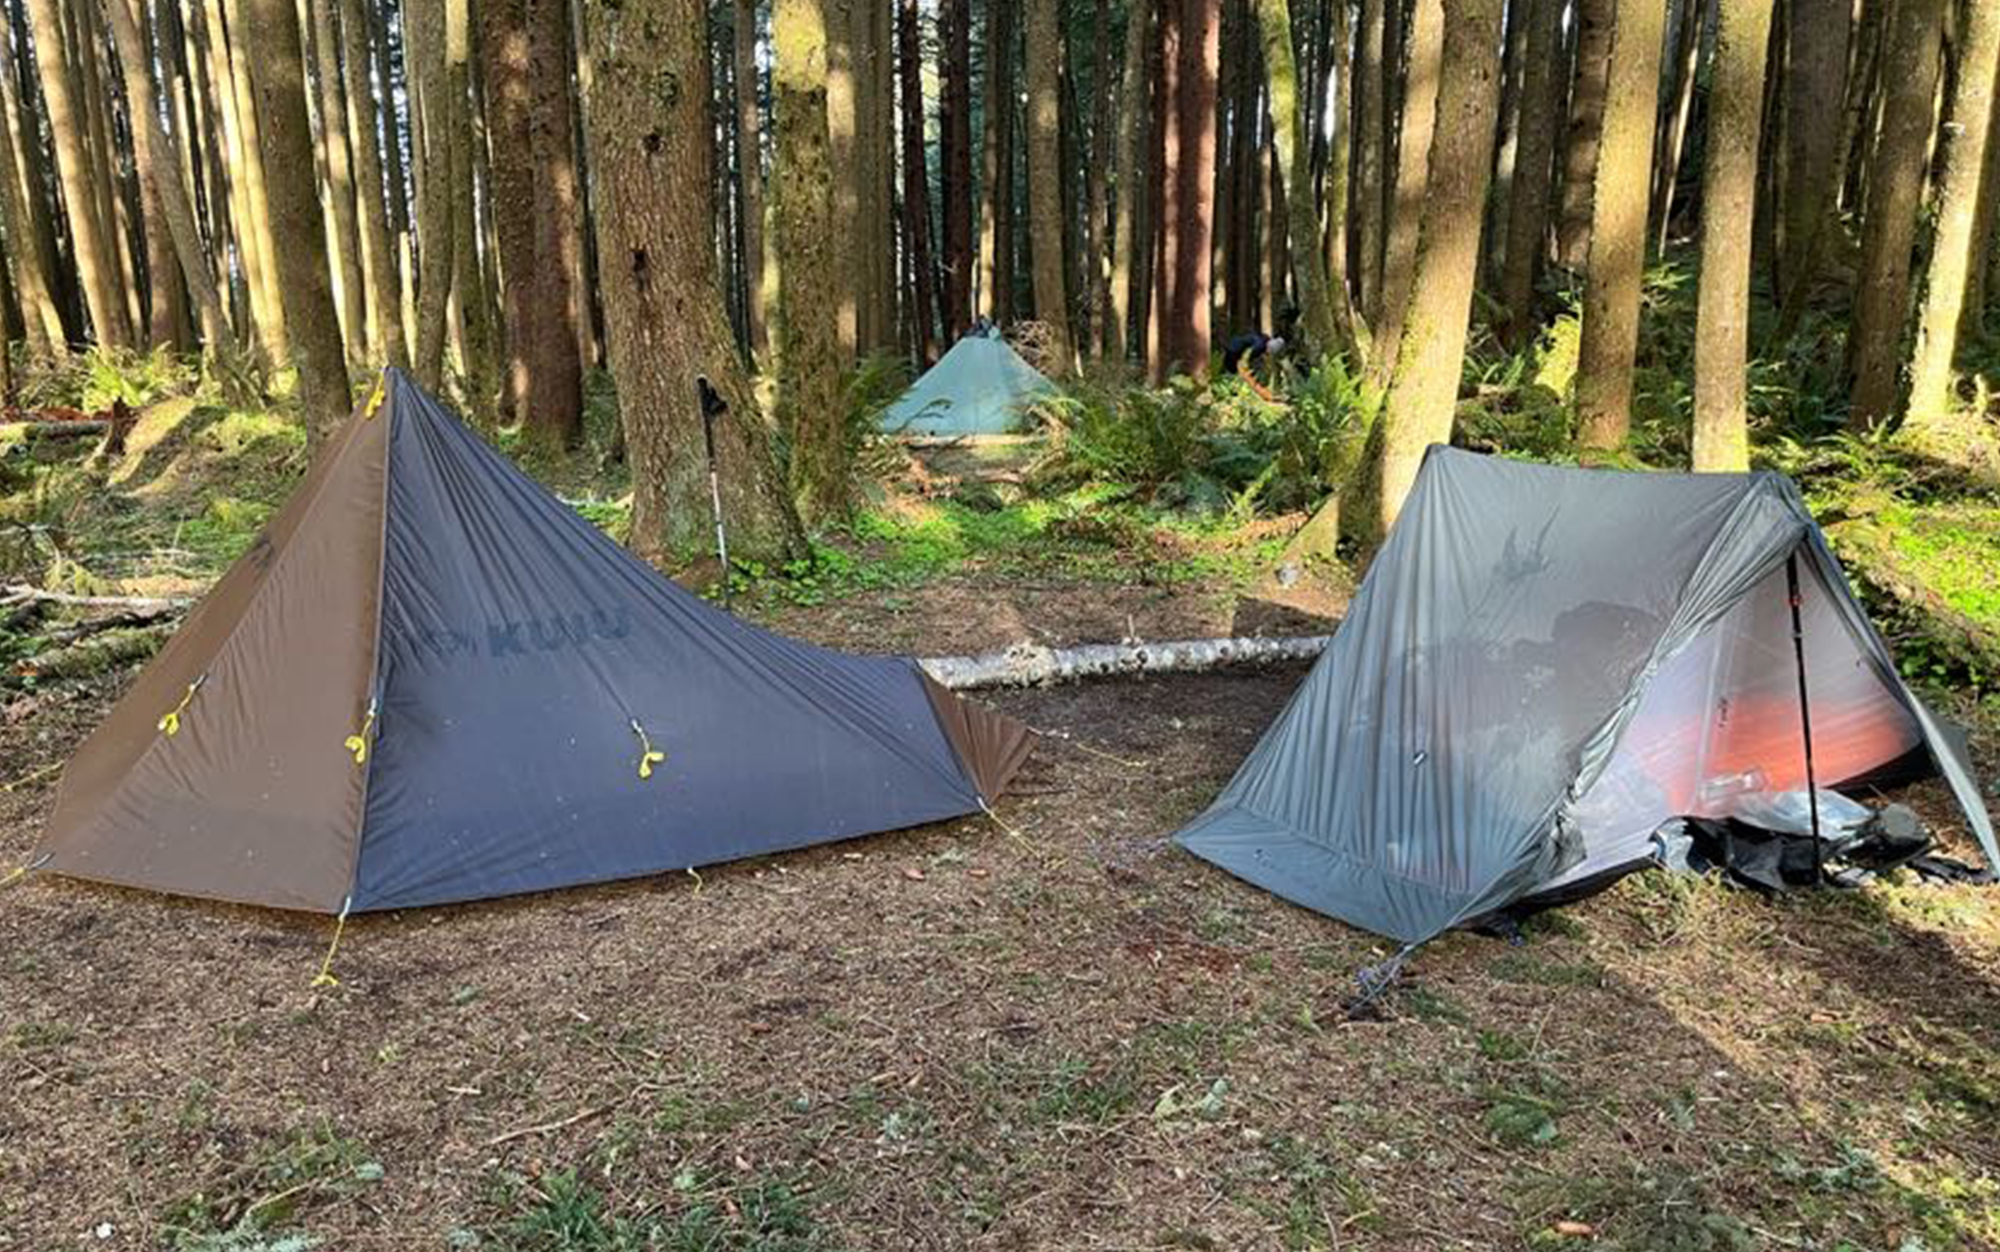 From left to right, the KUIU Summit Star, Seek Outside Cimarron, and Gossamer Gear The One on the third morning of testing along the Oregon Coast Trail.